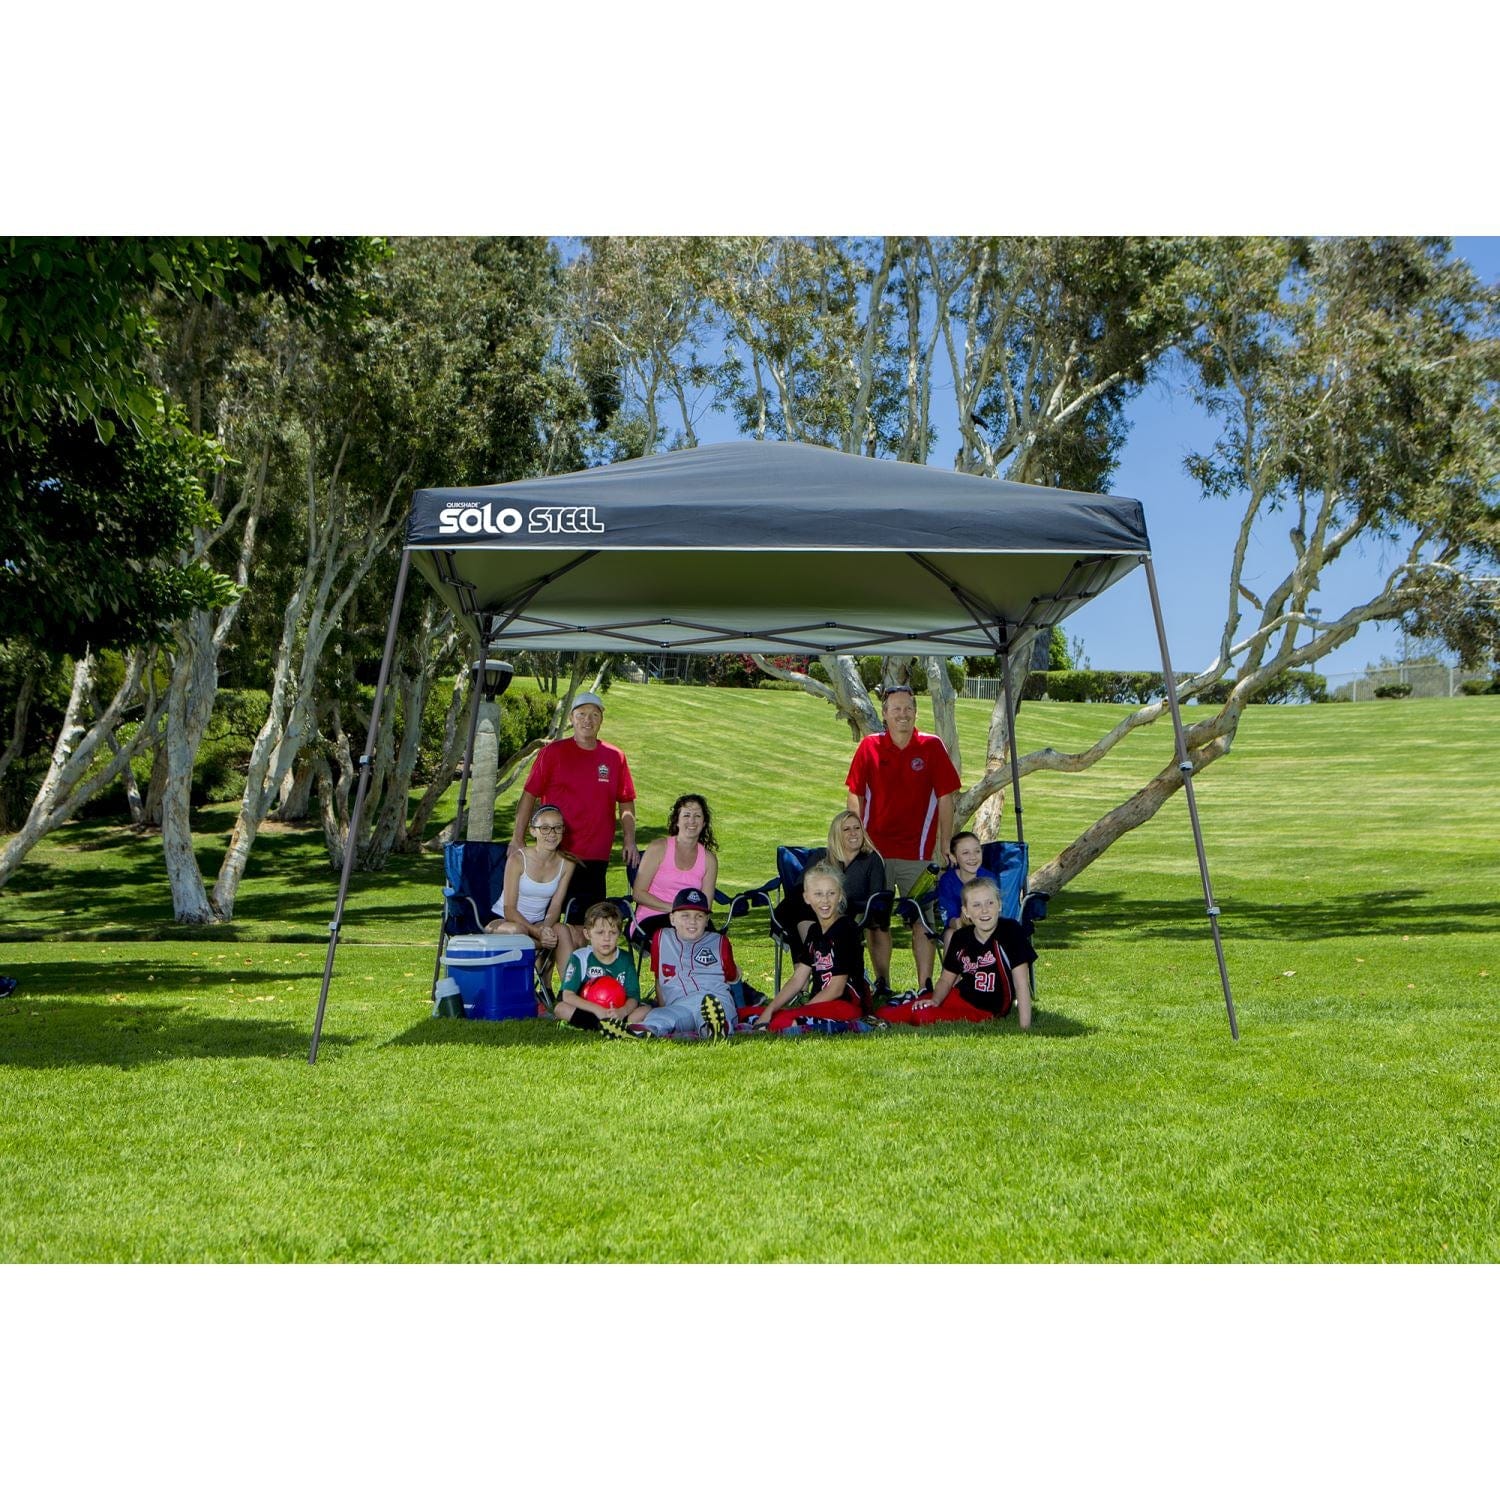 Quik Shade Pop Up Canopies Quik Shade | Solo Steel 90 11' x 11' Slant Leg Canopy - Midnight Blue 167525DS